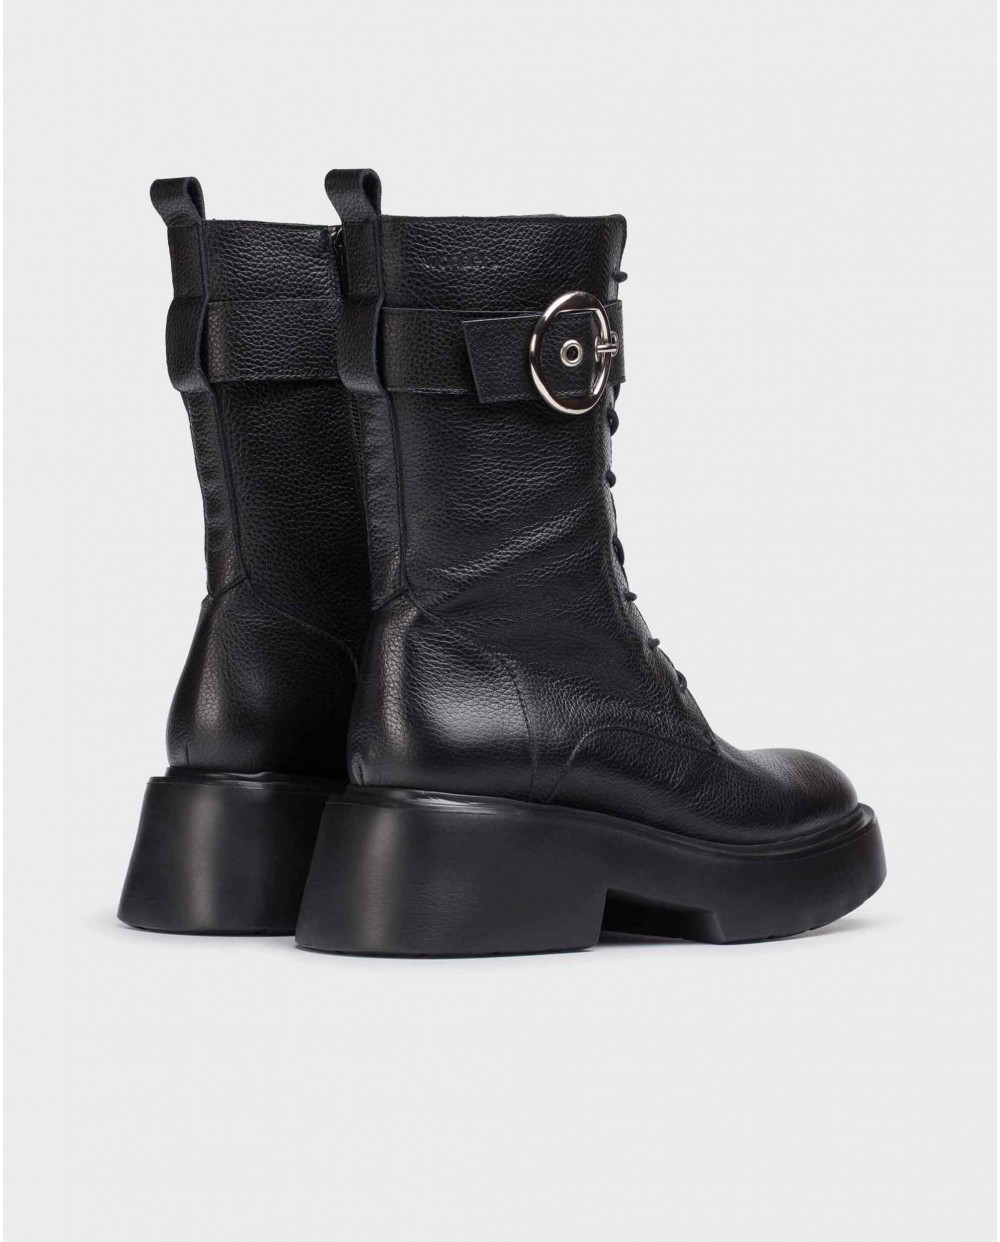 Wonders-Ankle Boots-Black Punk Boot